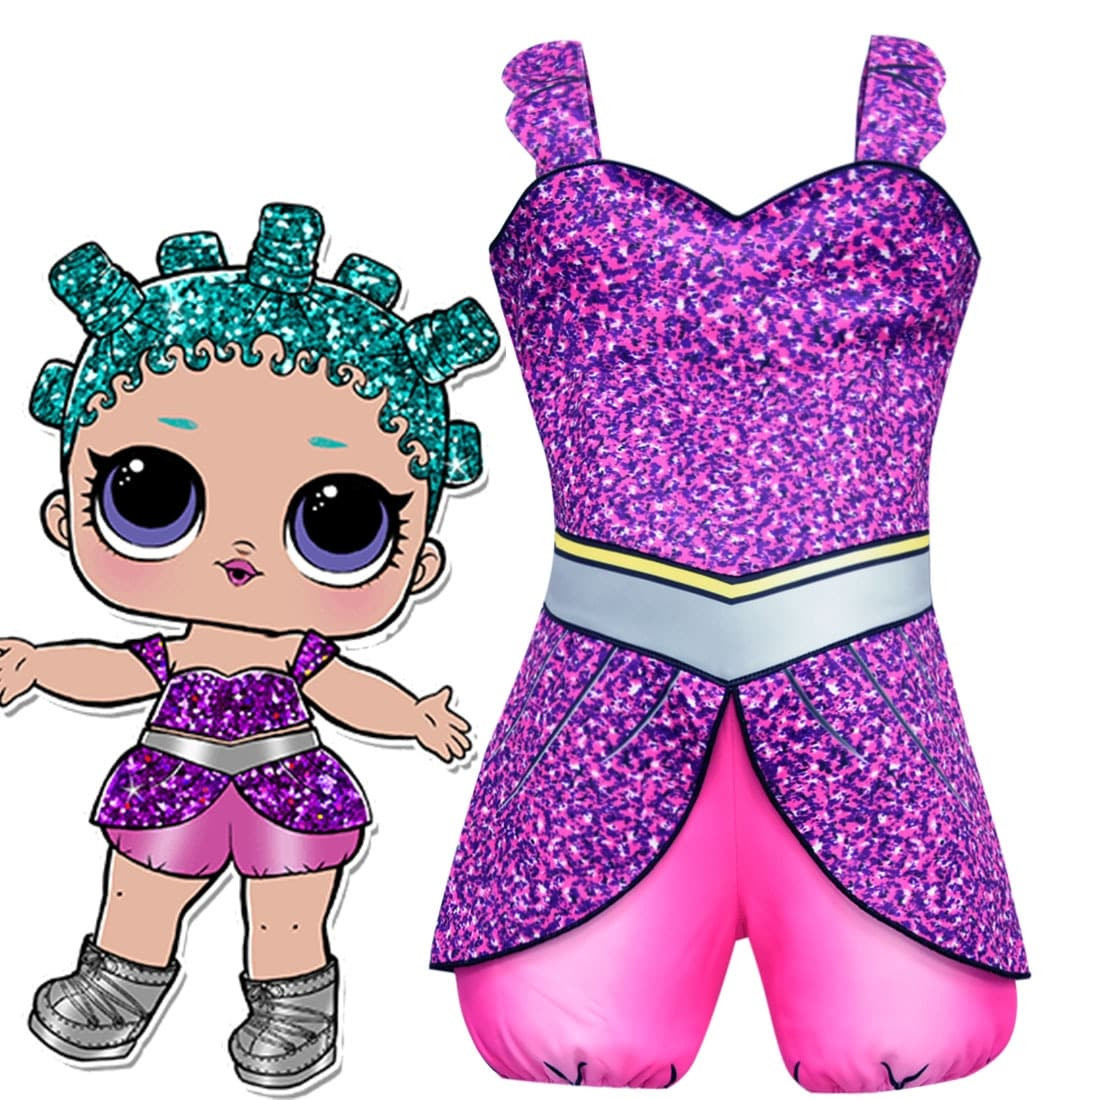 L.O.L. Surprise Cosmic Queen Doll Costume for Girls